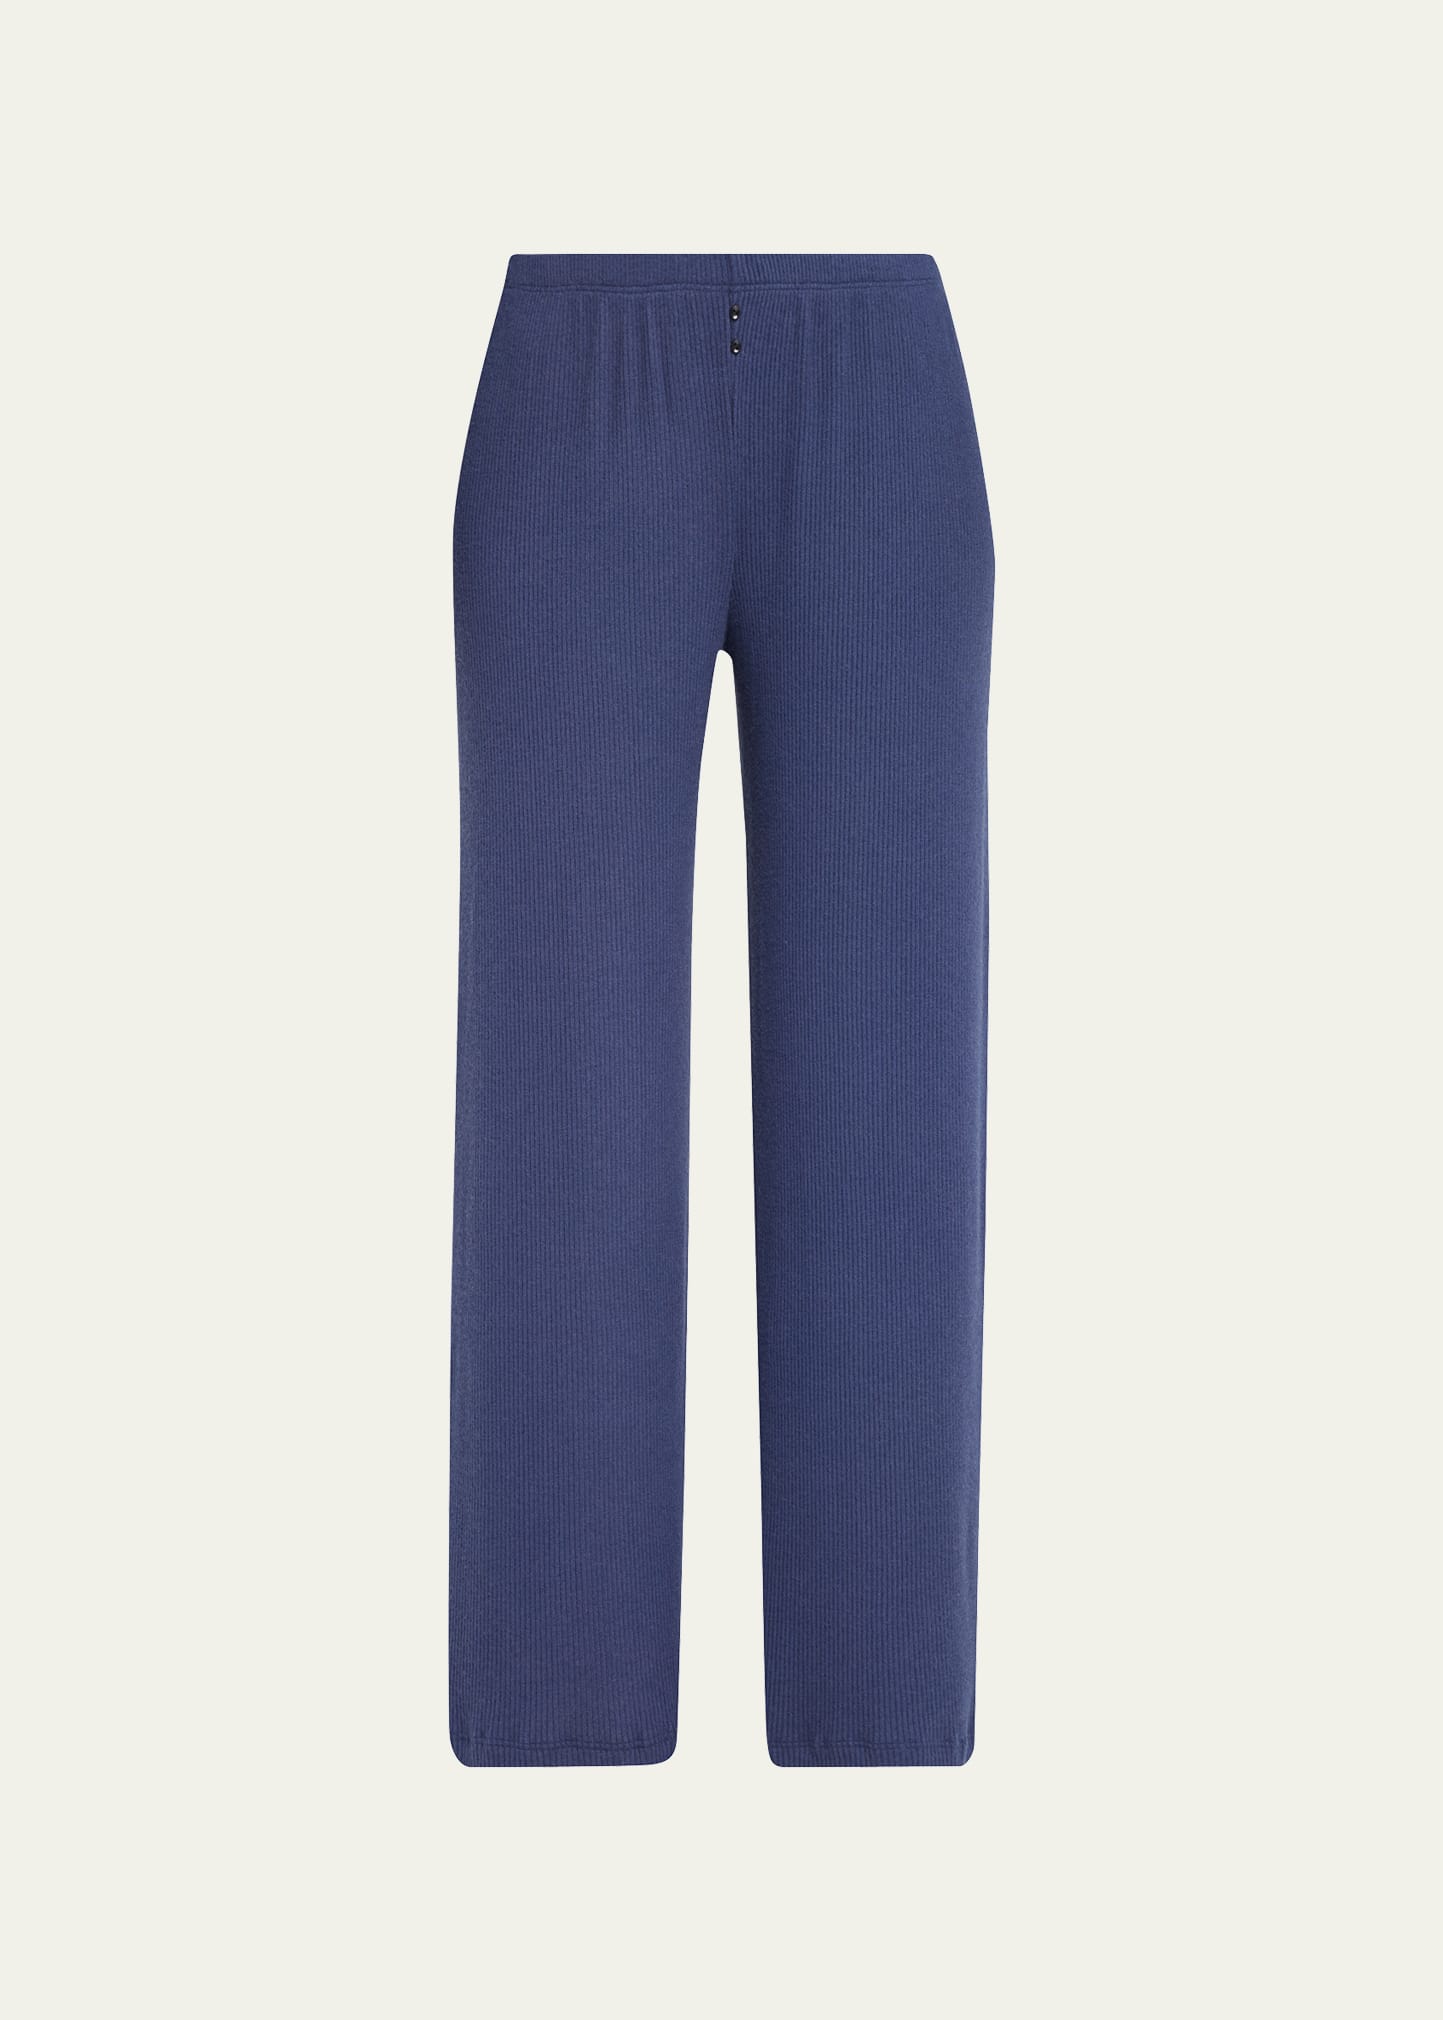 Andine Soleil Cropped Ribbed Pants